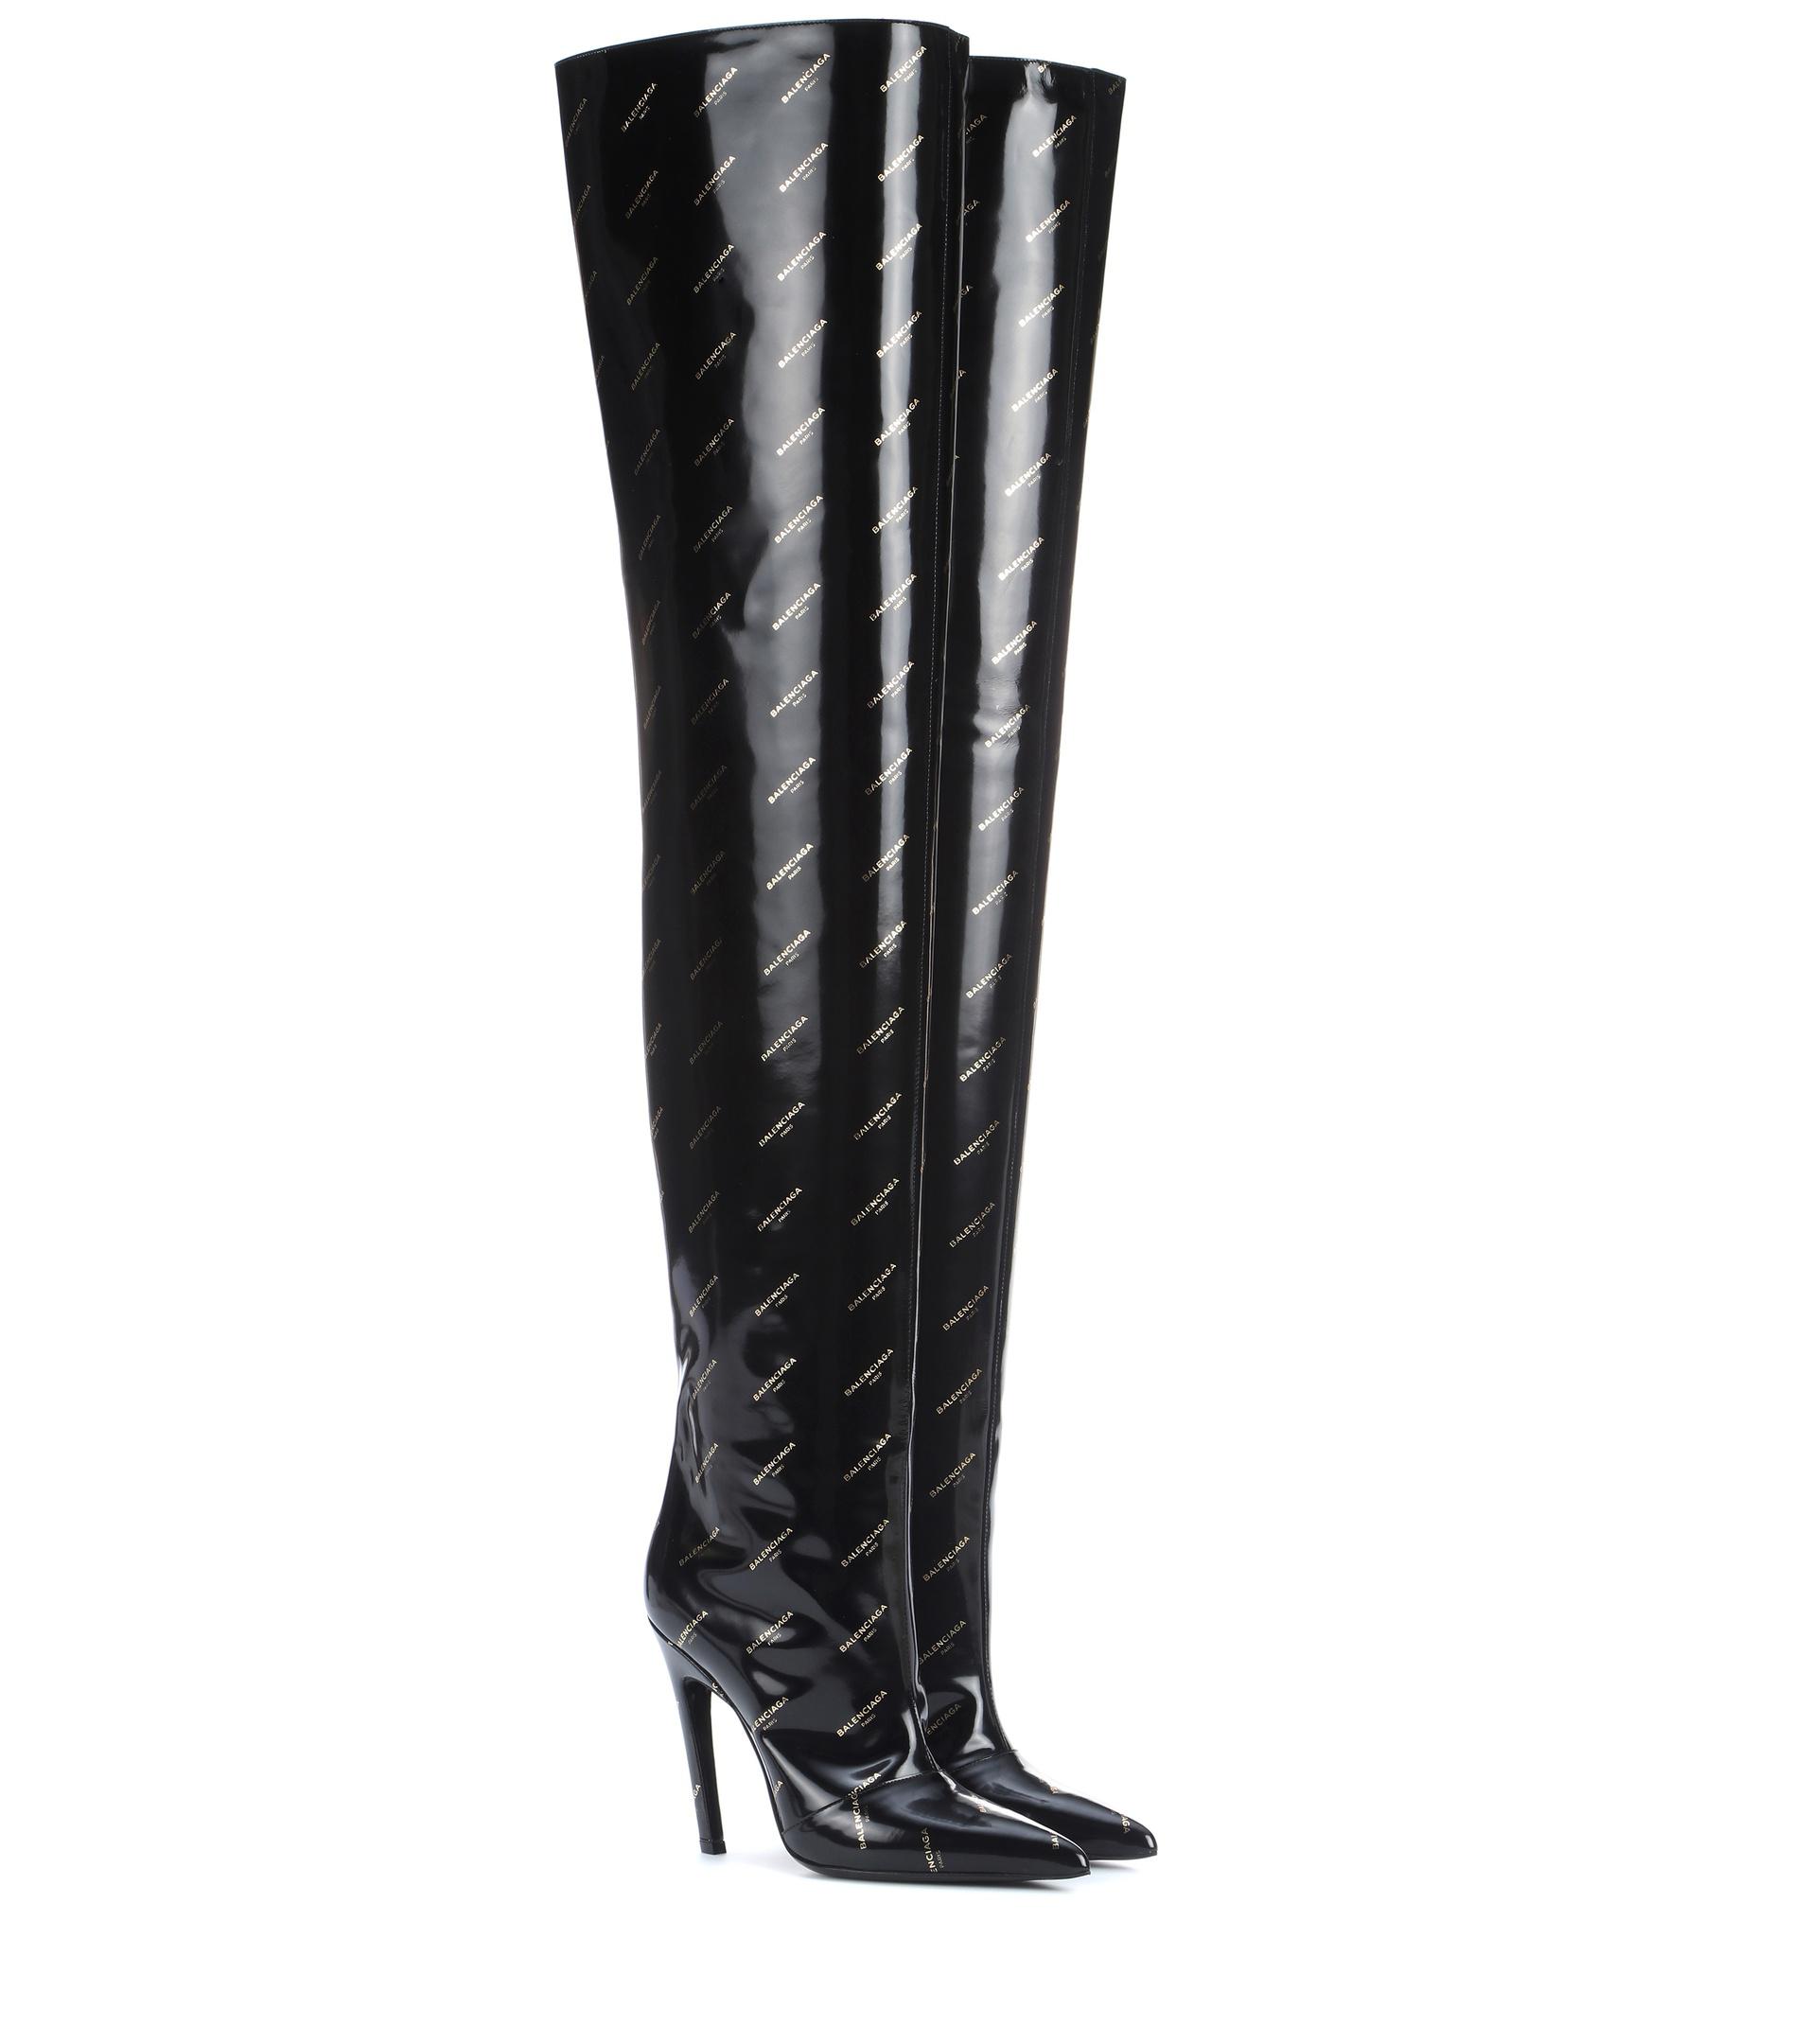 Balenciaga Knife Over-the-knee Leather Boots in Black - Lyst